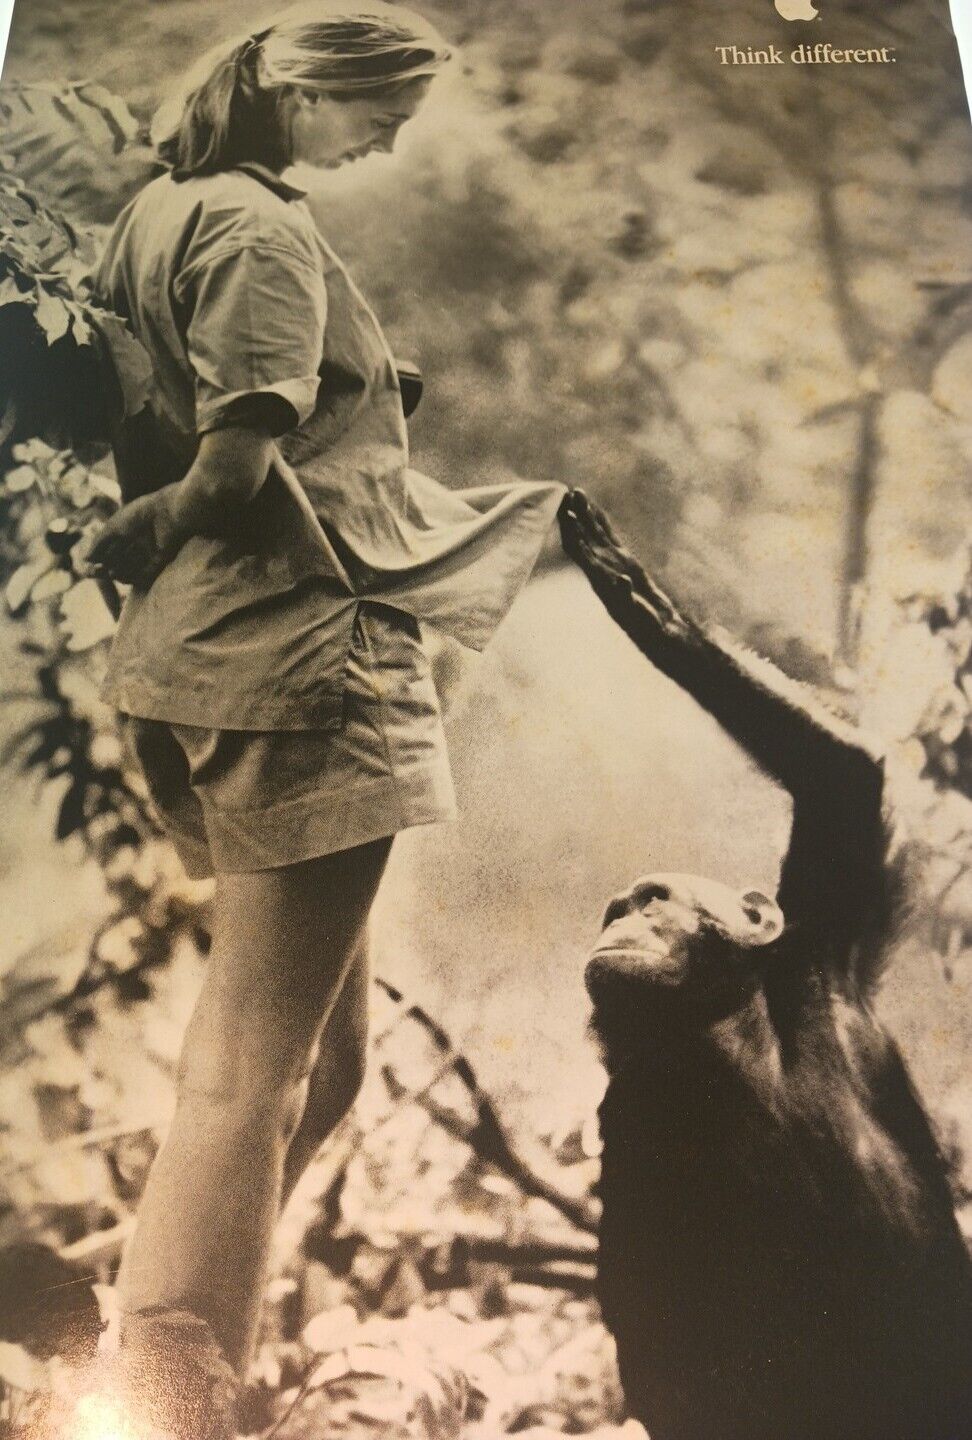 Photographic Images Jane Goodall And Chimp Apple Think Different Campaigns 90s